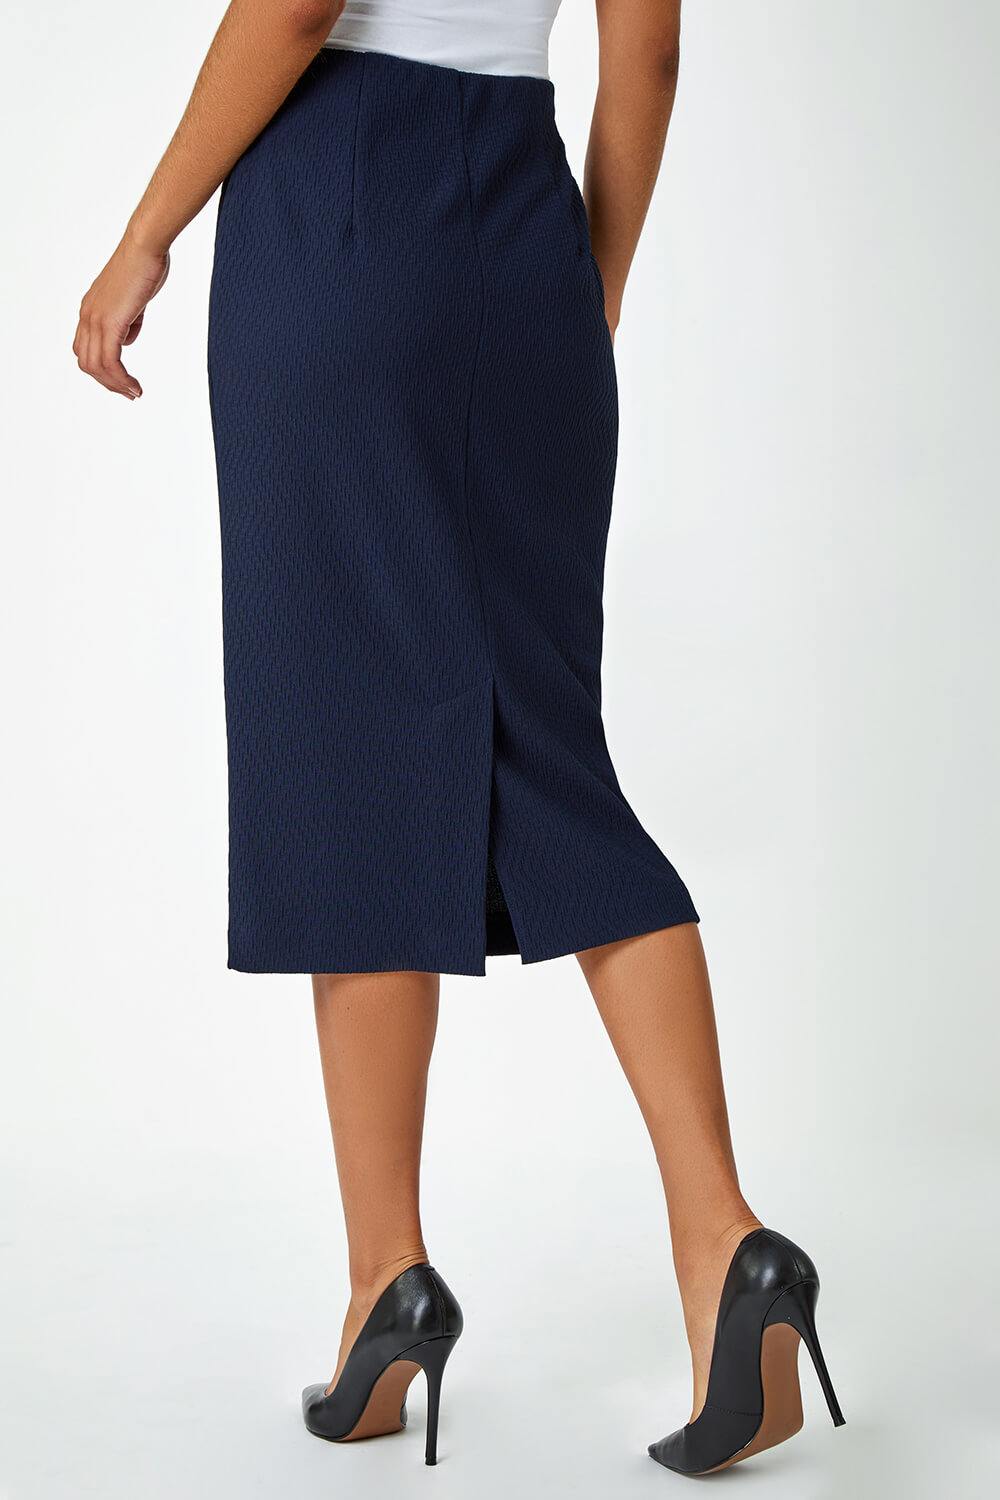 Navy  Textured Pencil Midi Stretch Skirt, Image 3 of 5